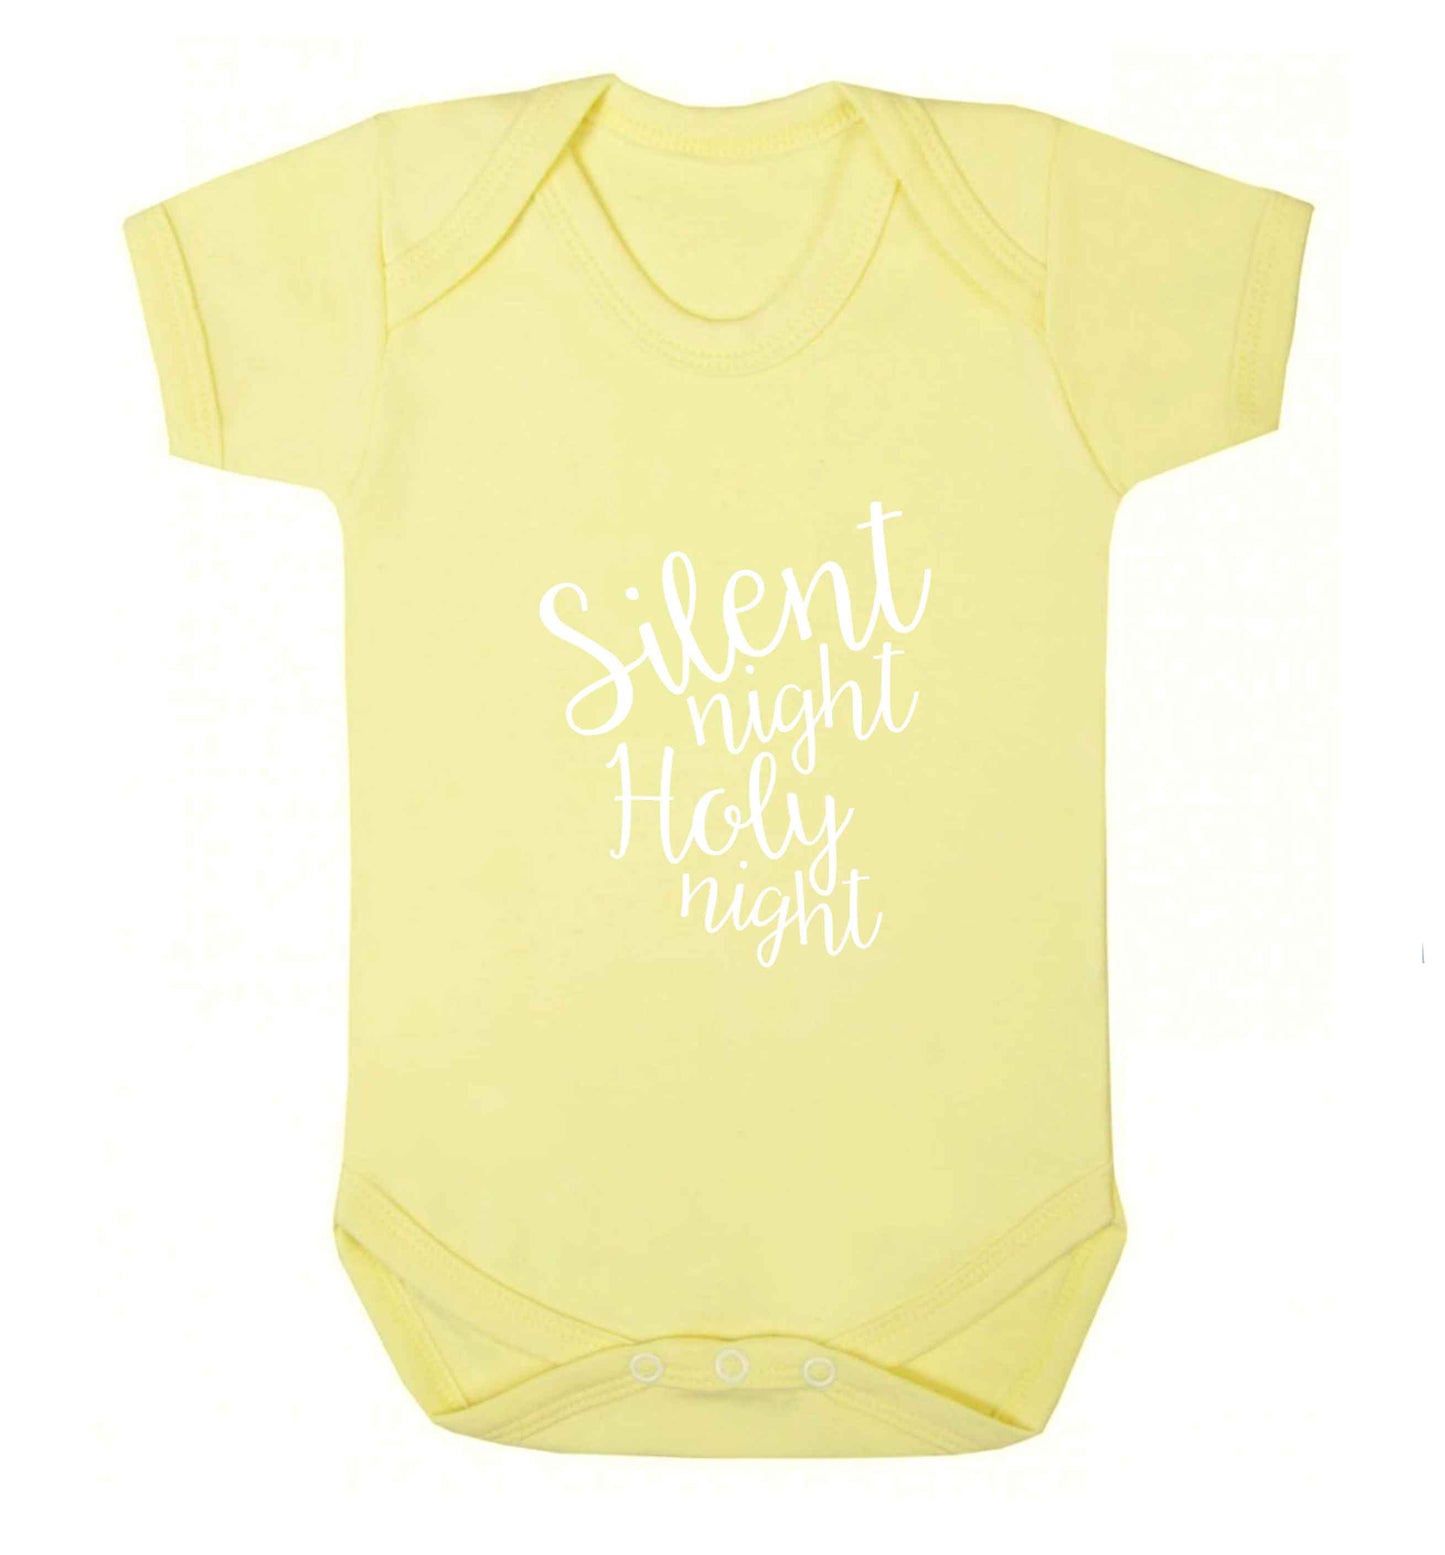 Silent night holy night baby vest pale yellow 18-24 months